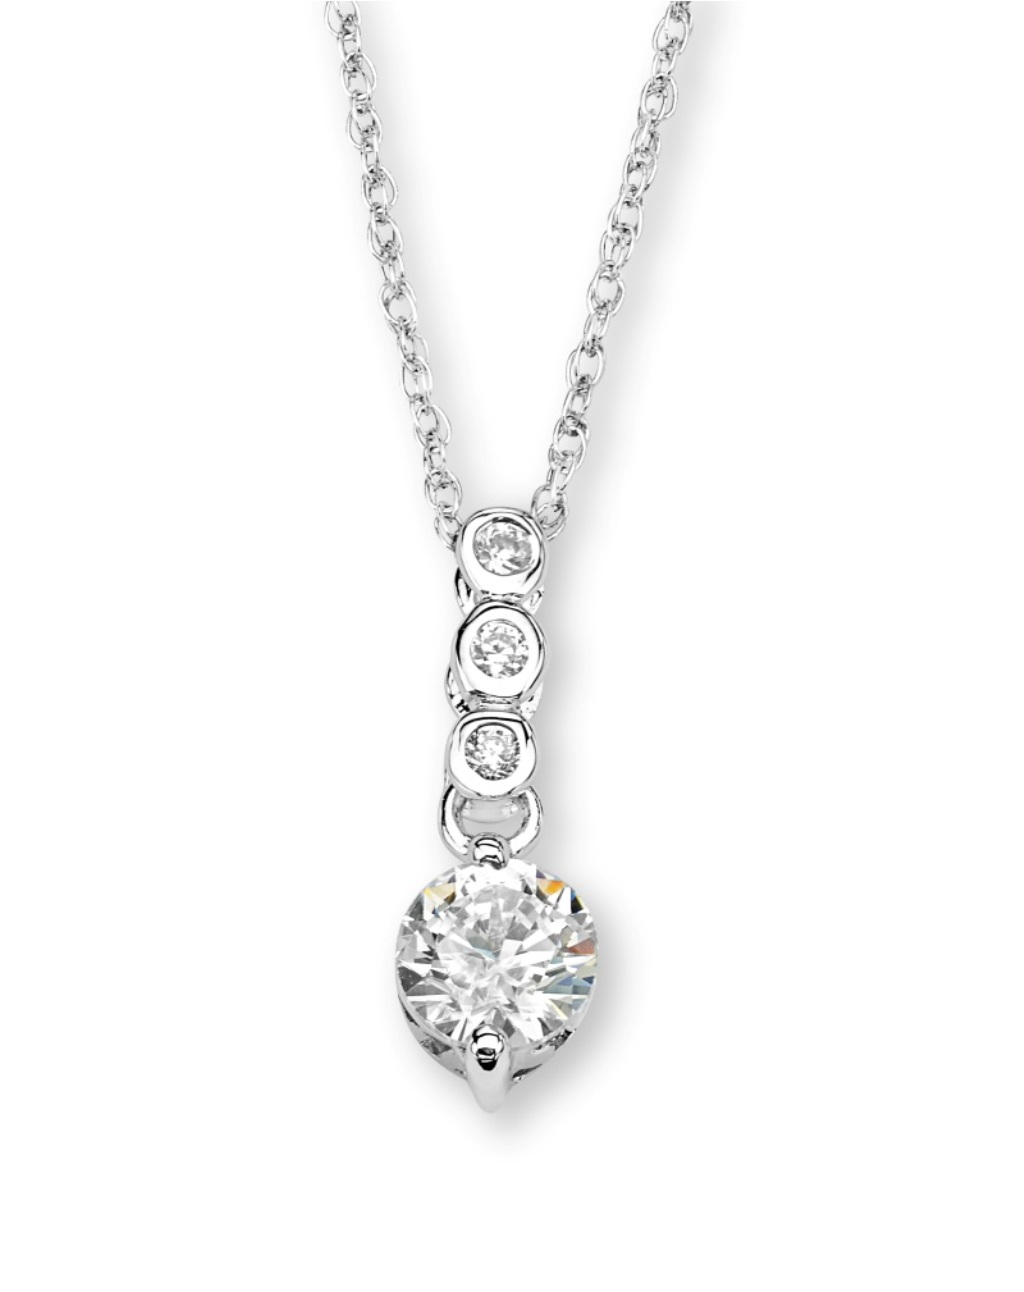 Round CZ Dangle Pendant Necklace, Rhodium Plated Sterling Silver, 18